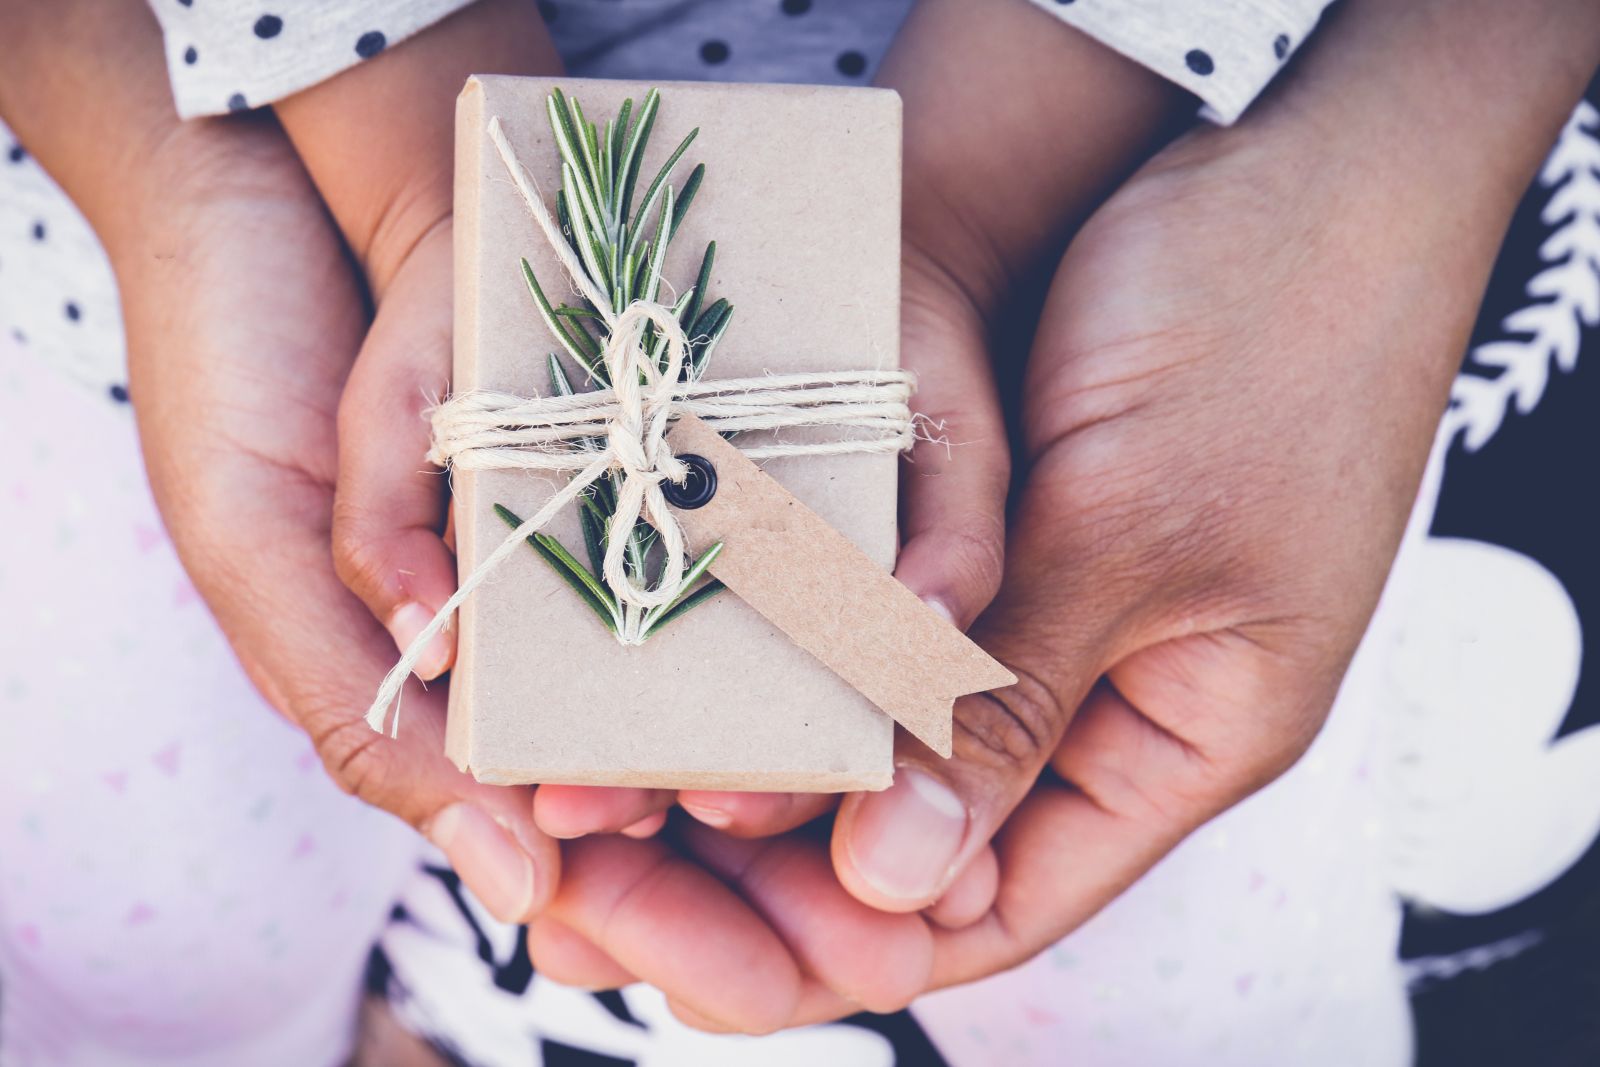 A child's hands are holding a brown paper wrapped box with a sprig of rosemary tucked into the jute ribbon ornament. The child's hands are resting on their parent's cupped hands. The background and the child's sleeves are grey knit fabric with dark blue polka dots.